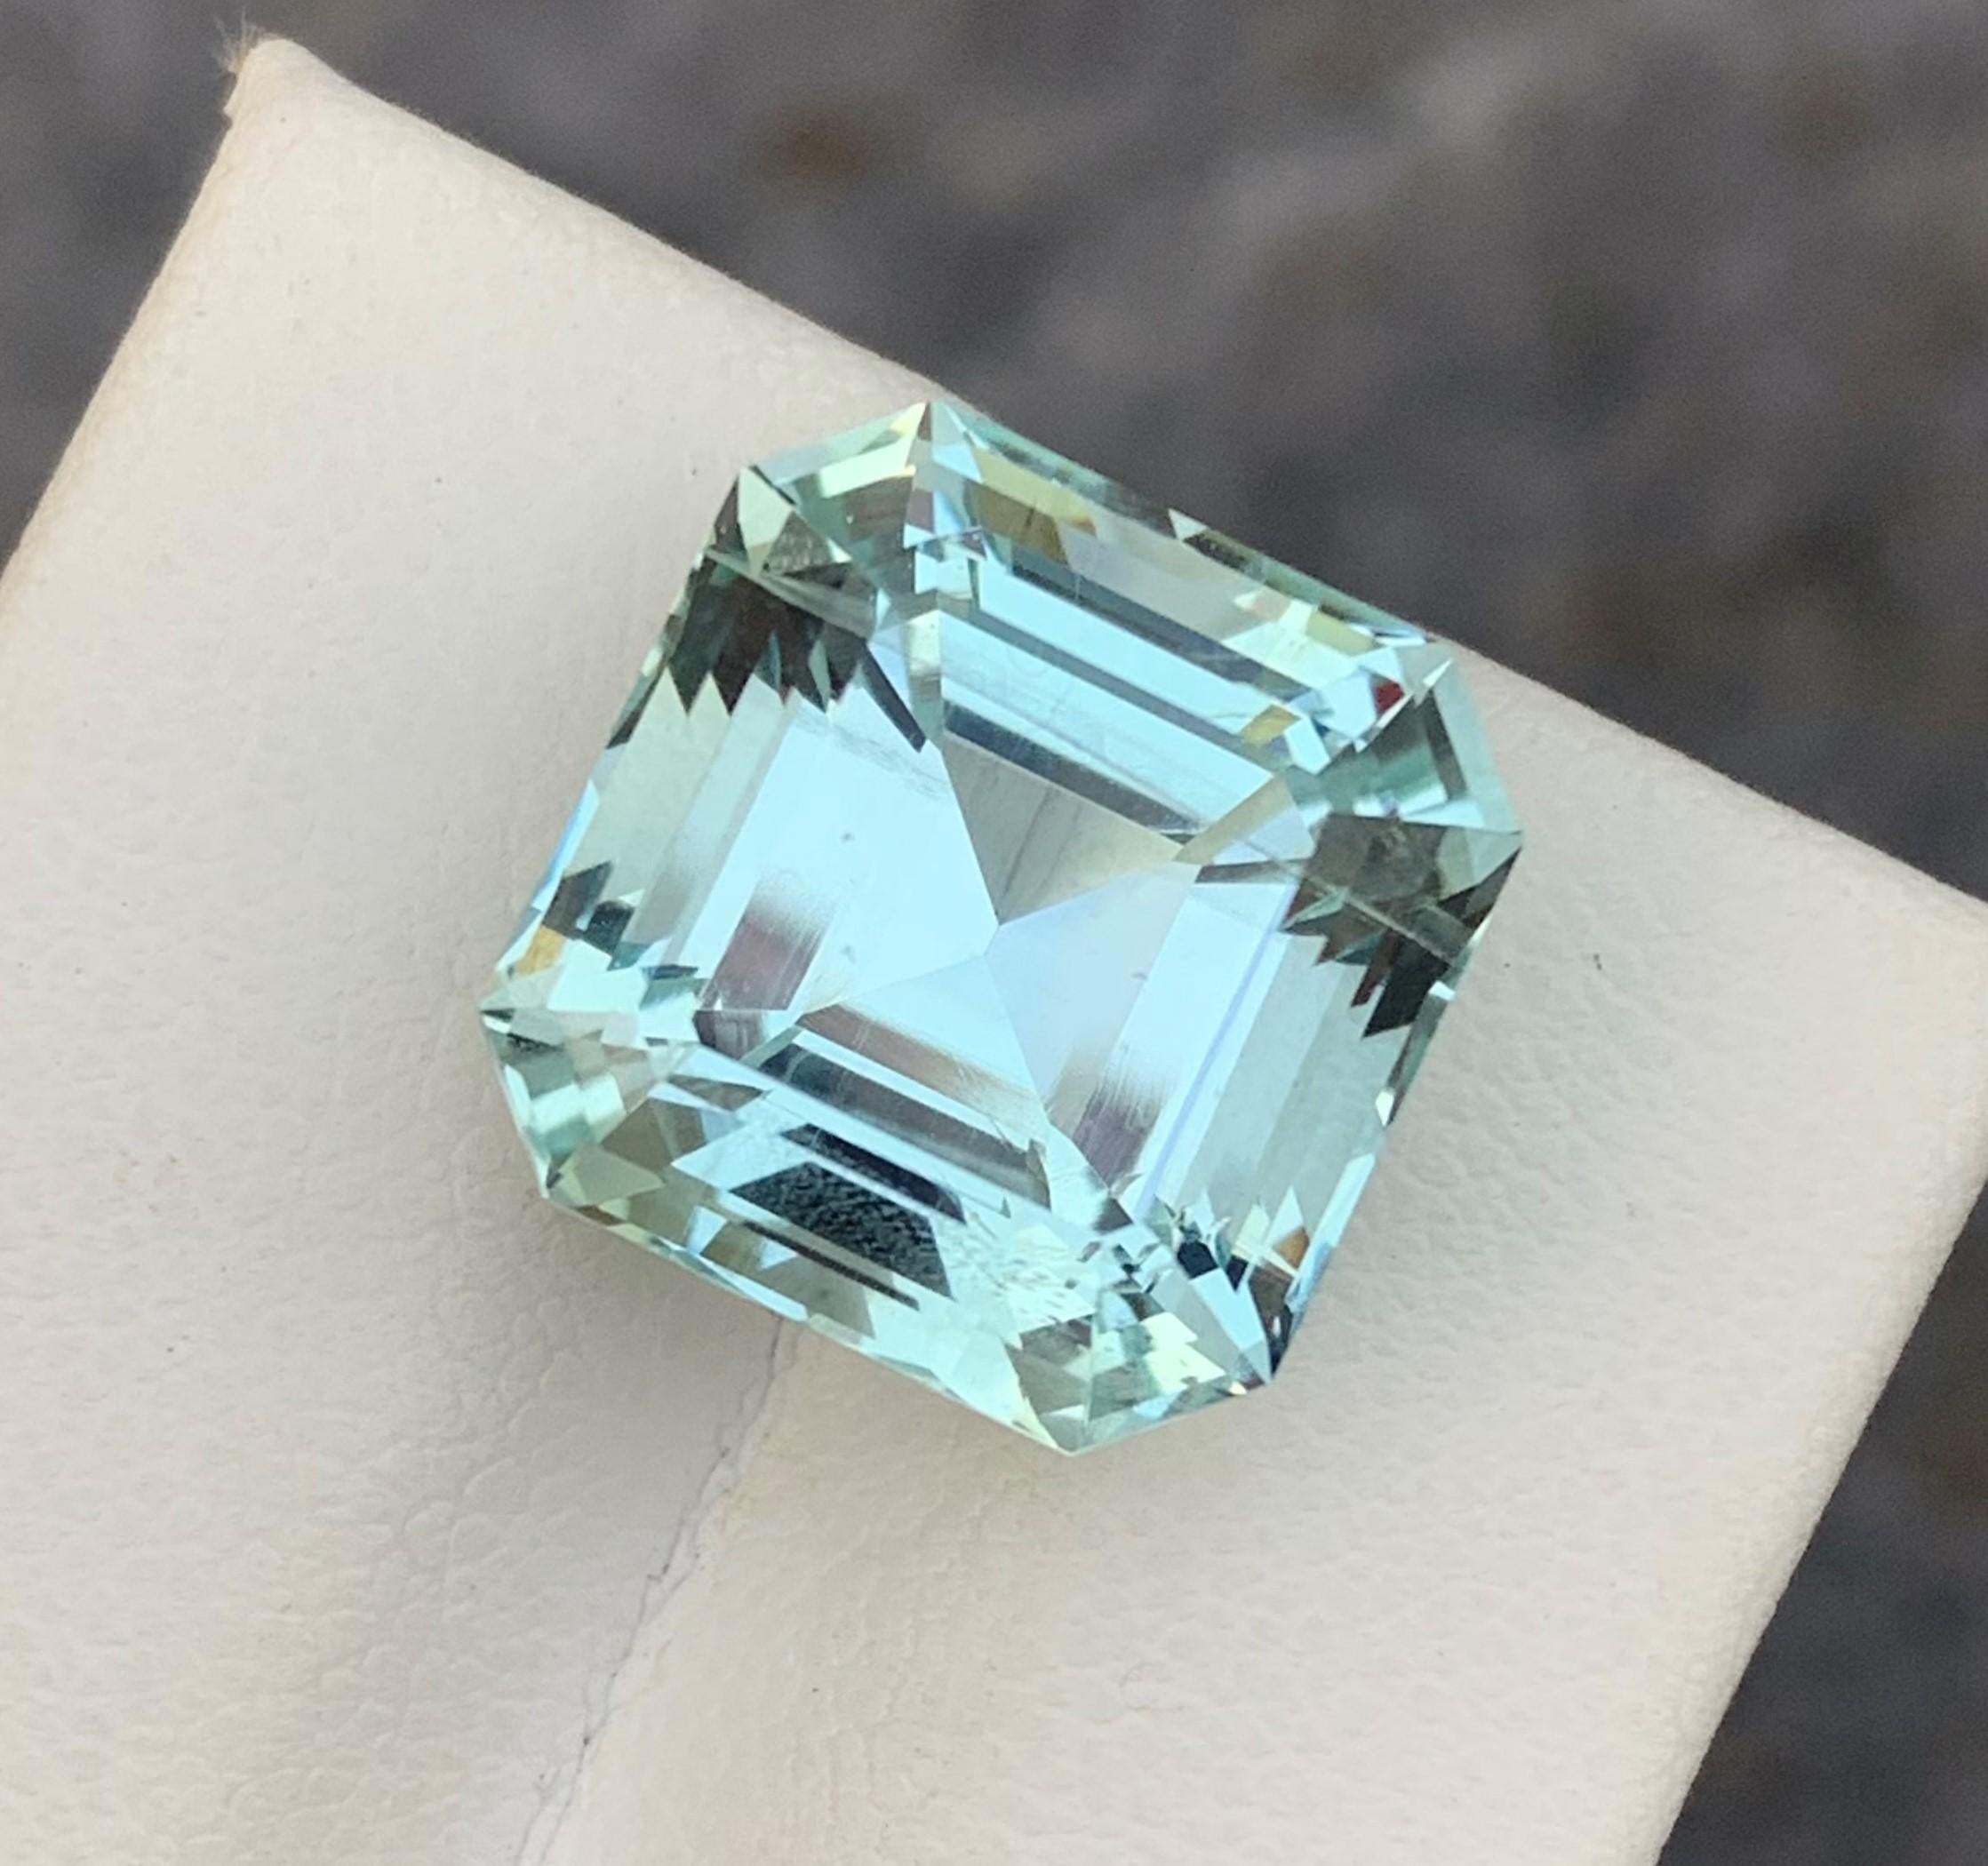 Gemstone Type : Aquamarine
Weight : 13.50 Carats
Dimensions : 13.6x14.1x10.5mm
Clarity : Narrow Line Cloud/Included
Origin : Pakistan
Shape: Asscher
Color: Light Blue
Certificate: On Demand
Birthstone Month: March
It has a shielding effect on your